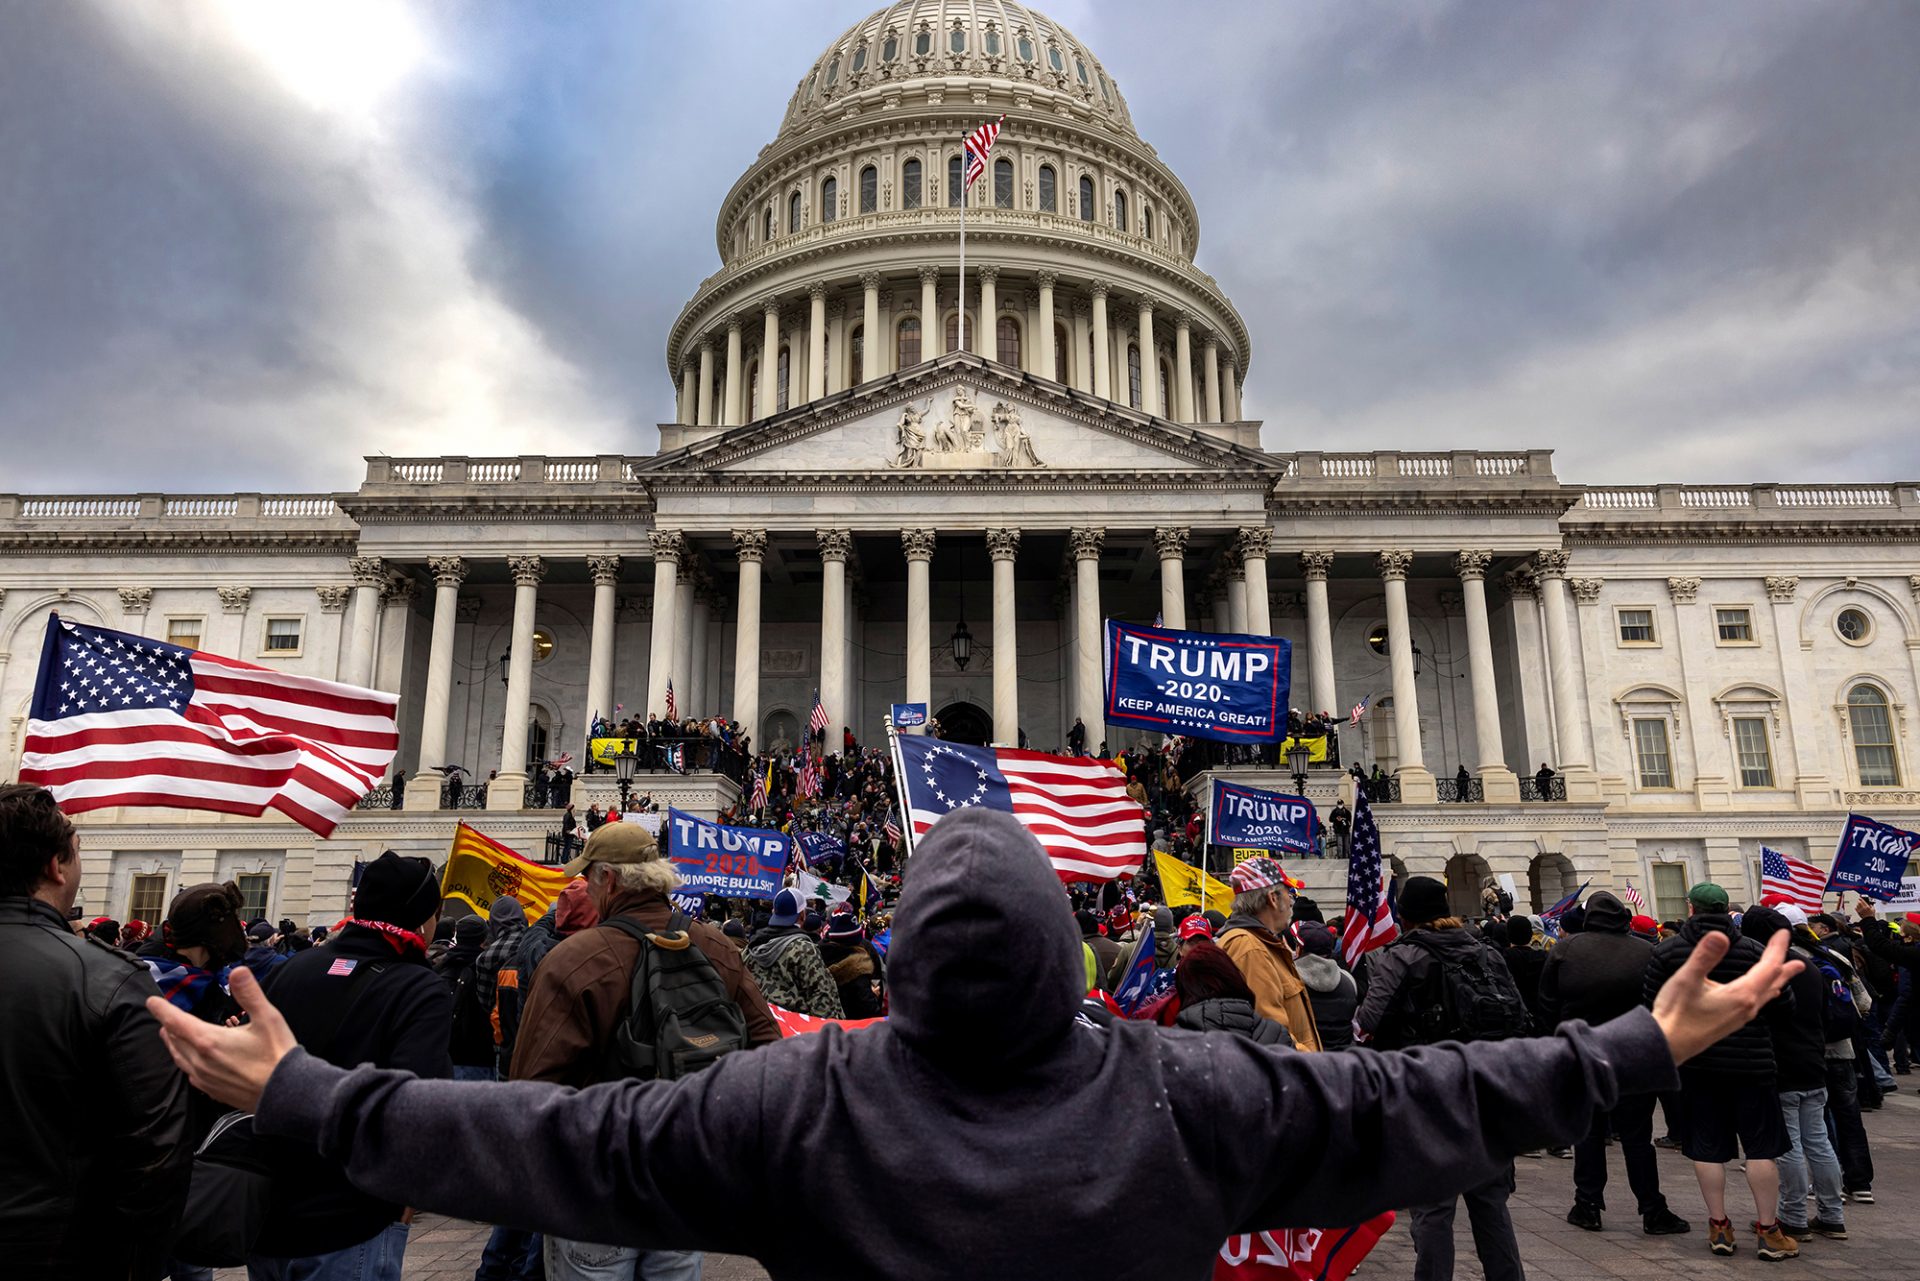 Pro-Trump protesters gather in front of the U.S. Capitol Building on Jan. 6, 2021 in Washington, D.C. They gathered to protest the ratification of President-elect Joe Biden's Electoral College victory over President Trump in the 2020 election. A pro-Trump mob later stormed the Capitol, breaking windows and clashing with police officers. Five people died as a result.